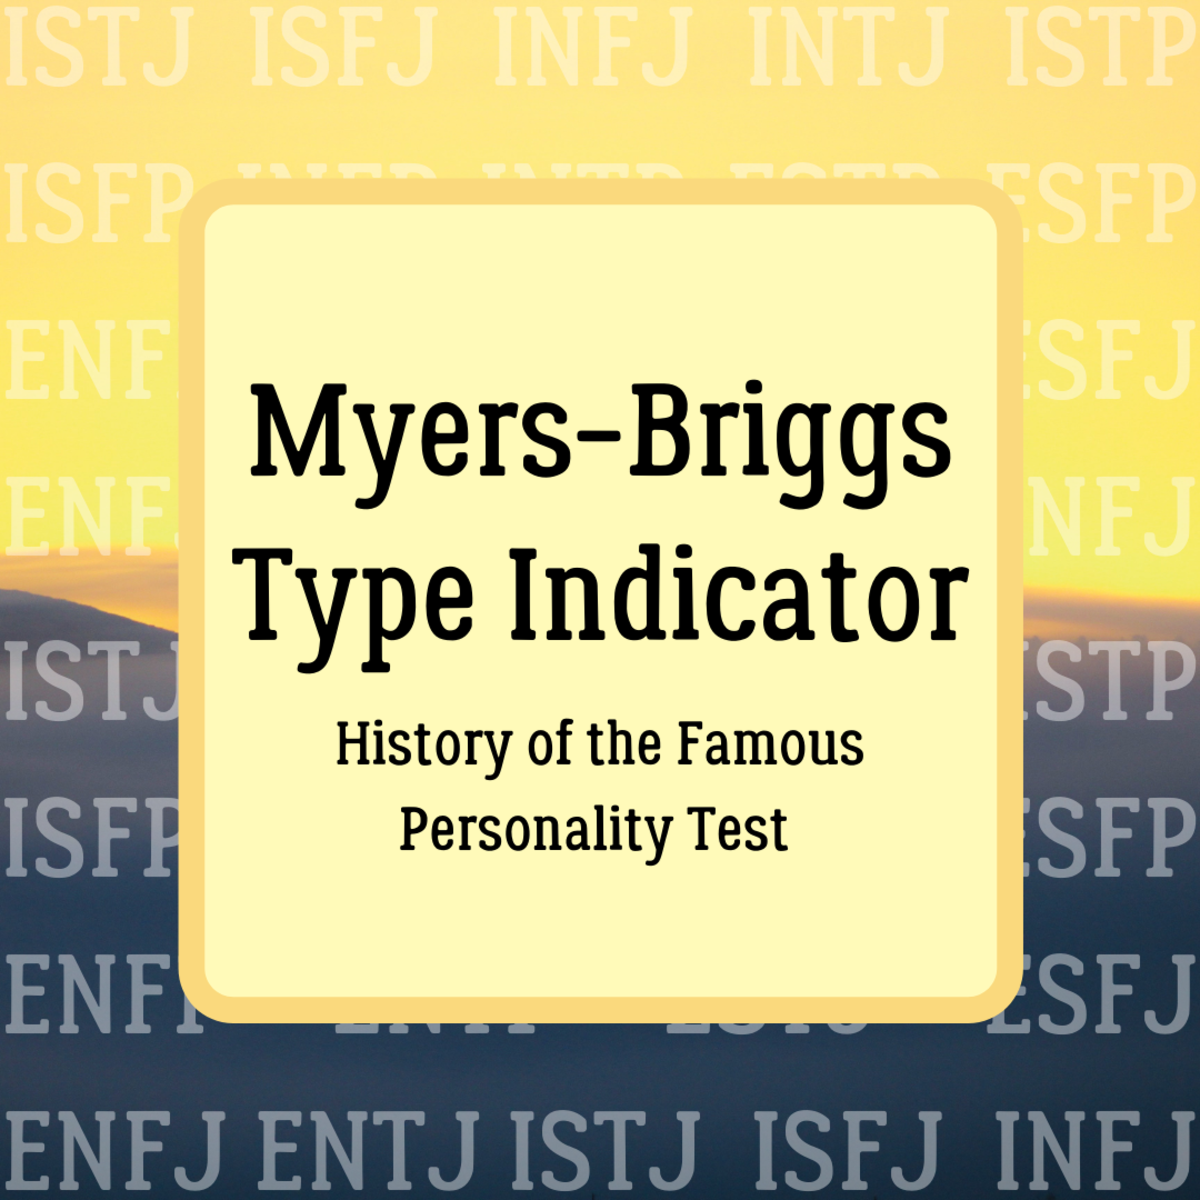 History and Significance of the Myers-Briggs Personality Test